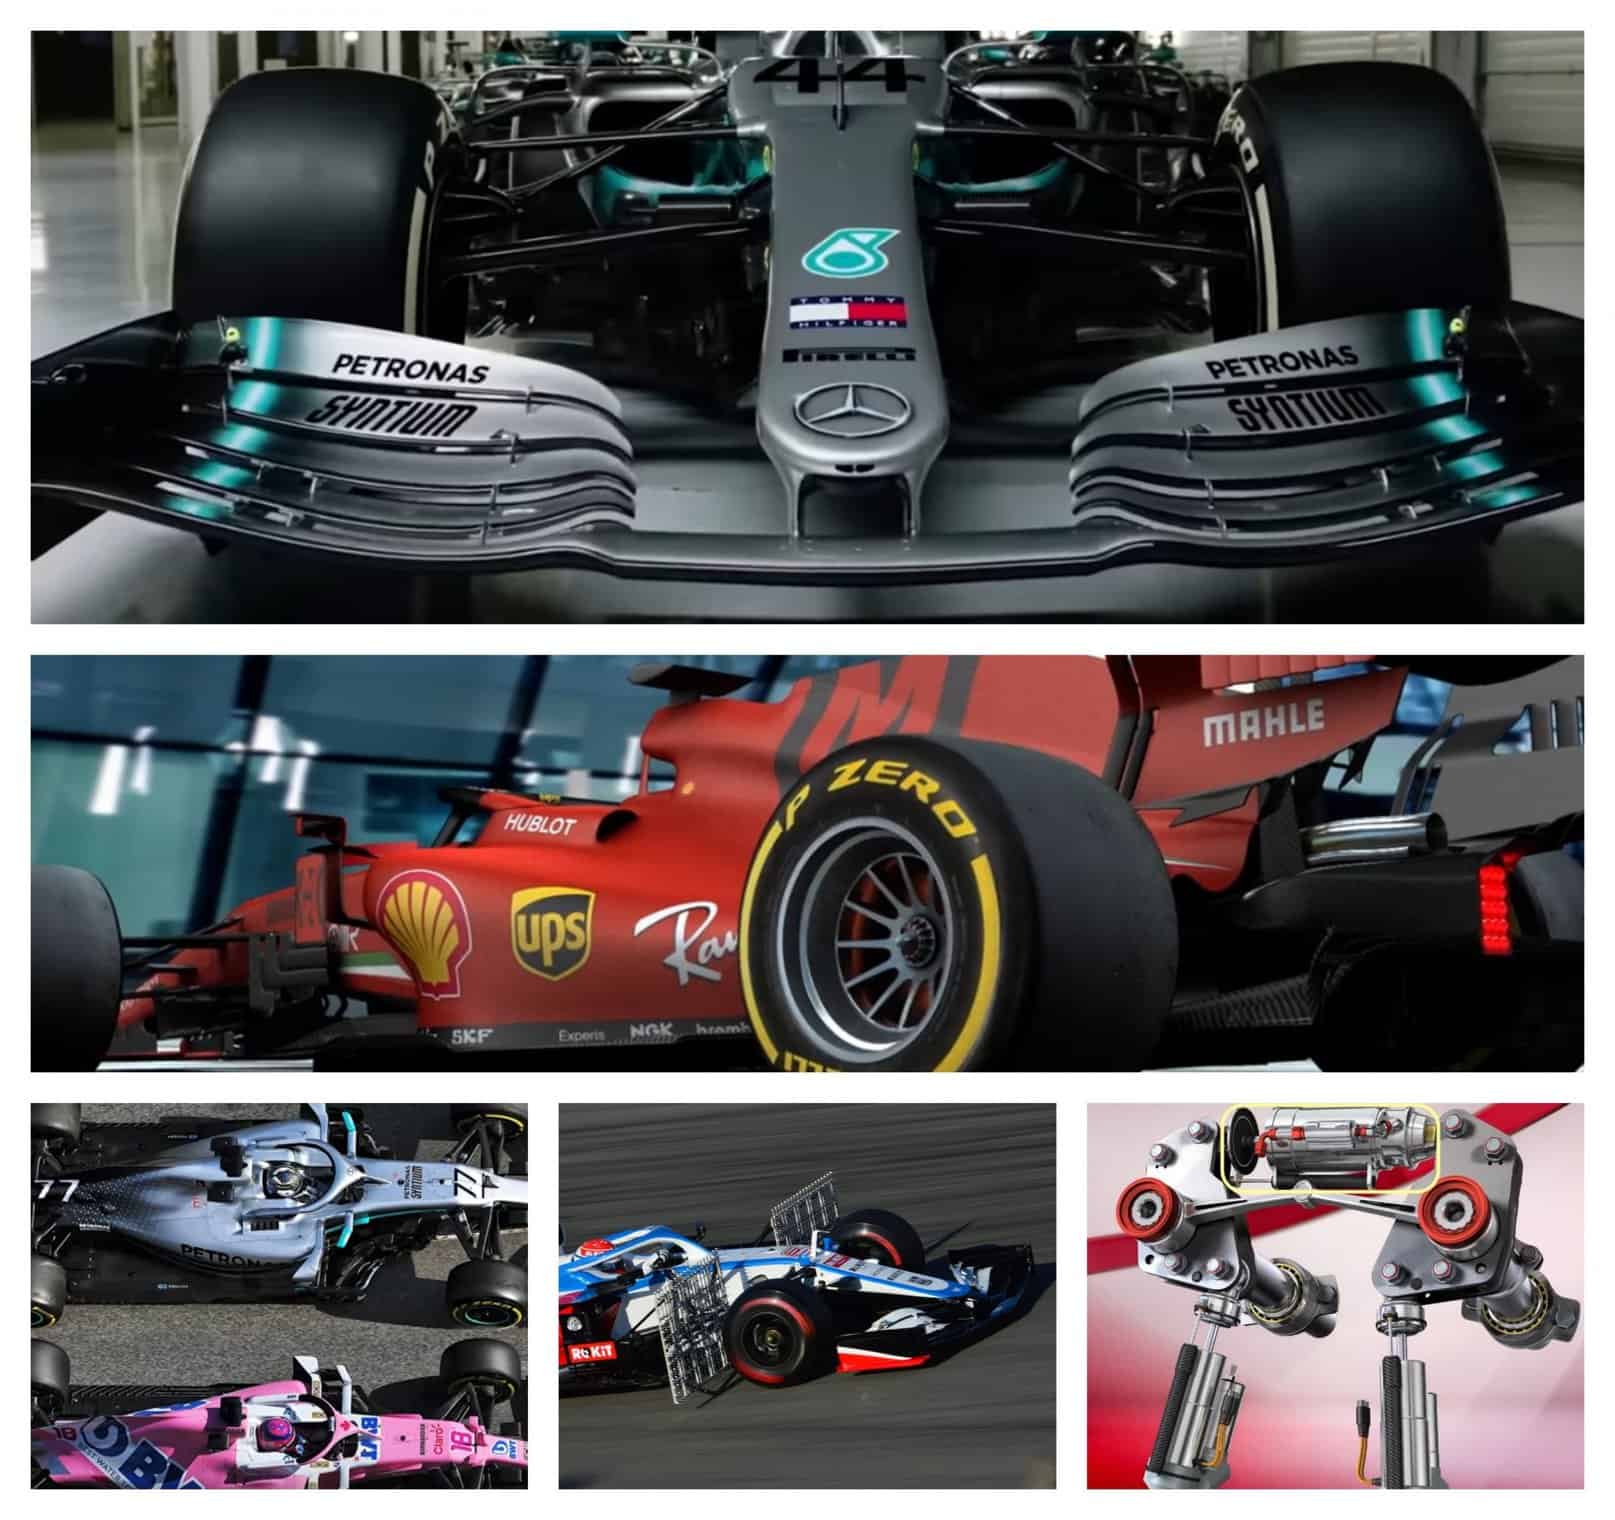 F1 2020 test: ranking, analysis and tech